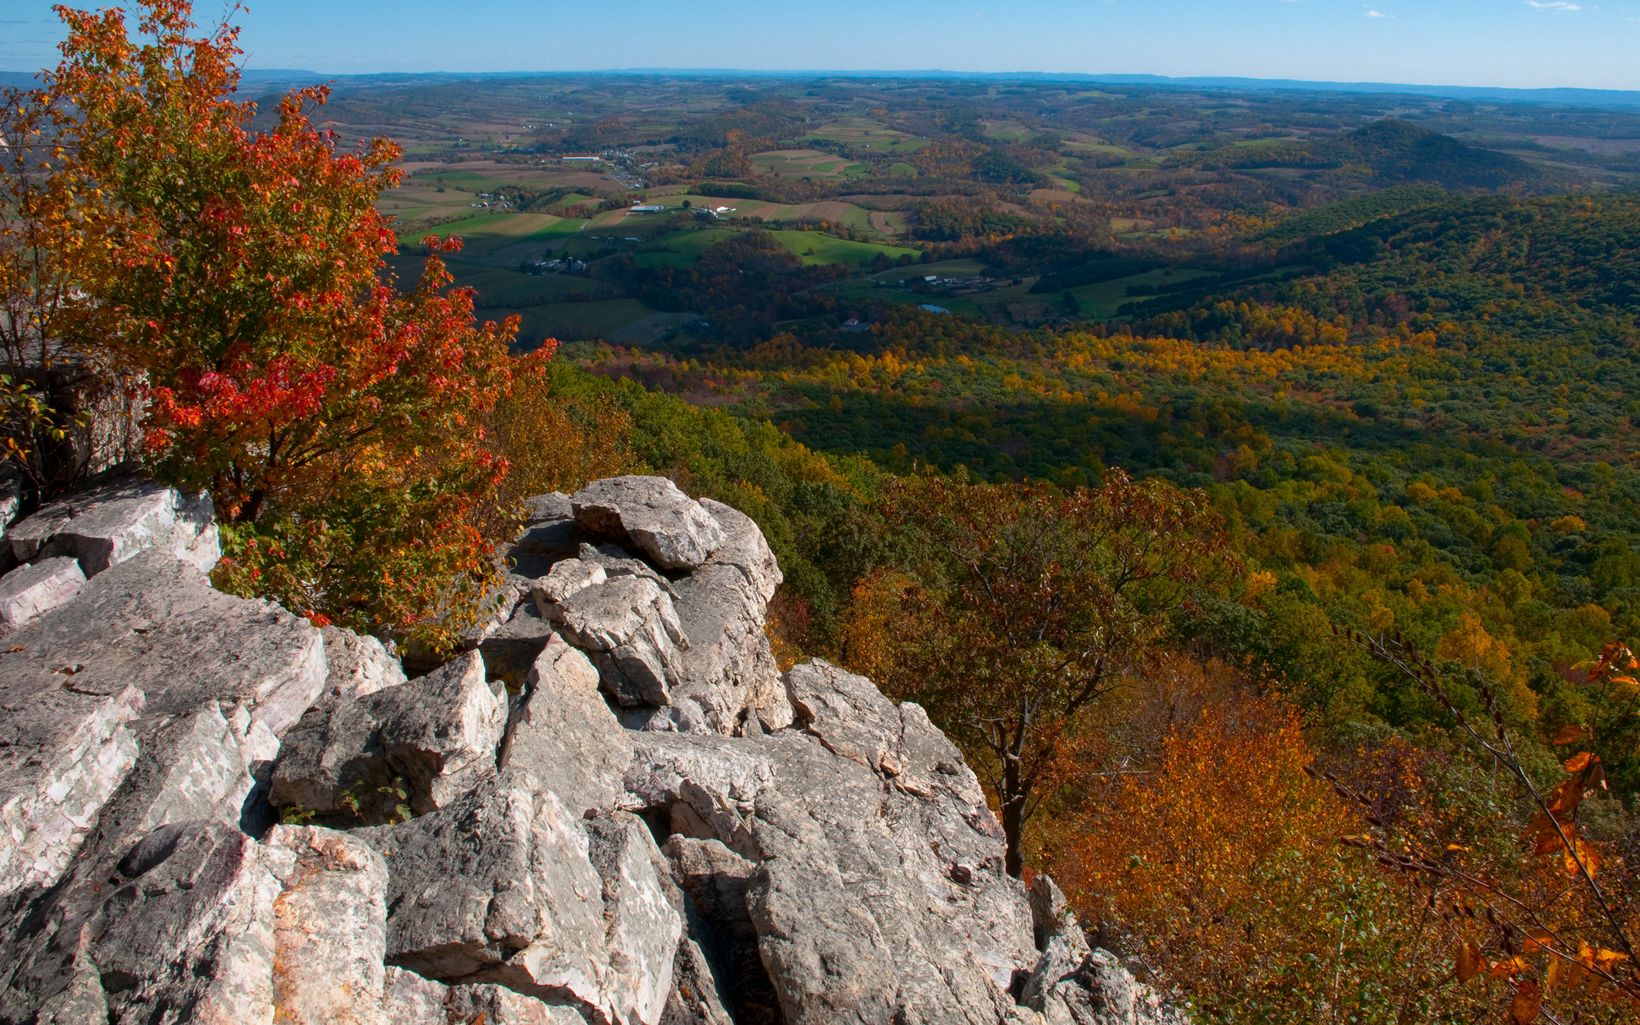 A valley view from a rocky outcrop on the Kittatinny Ridge